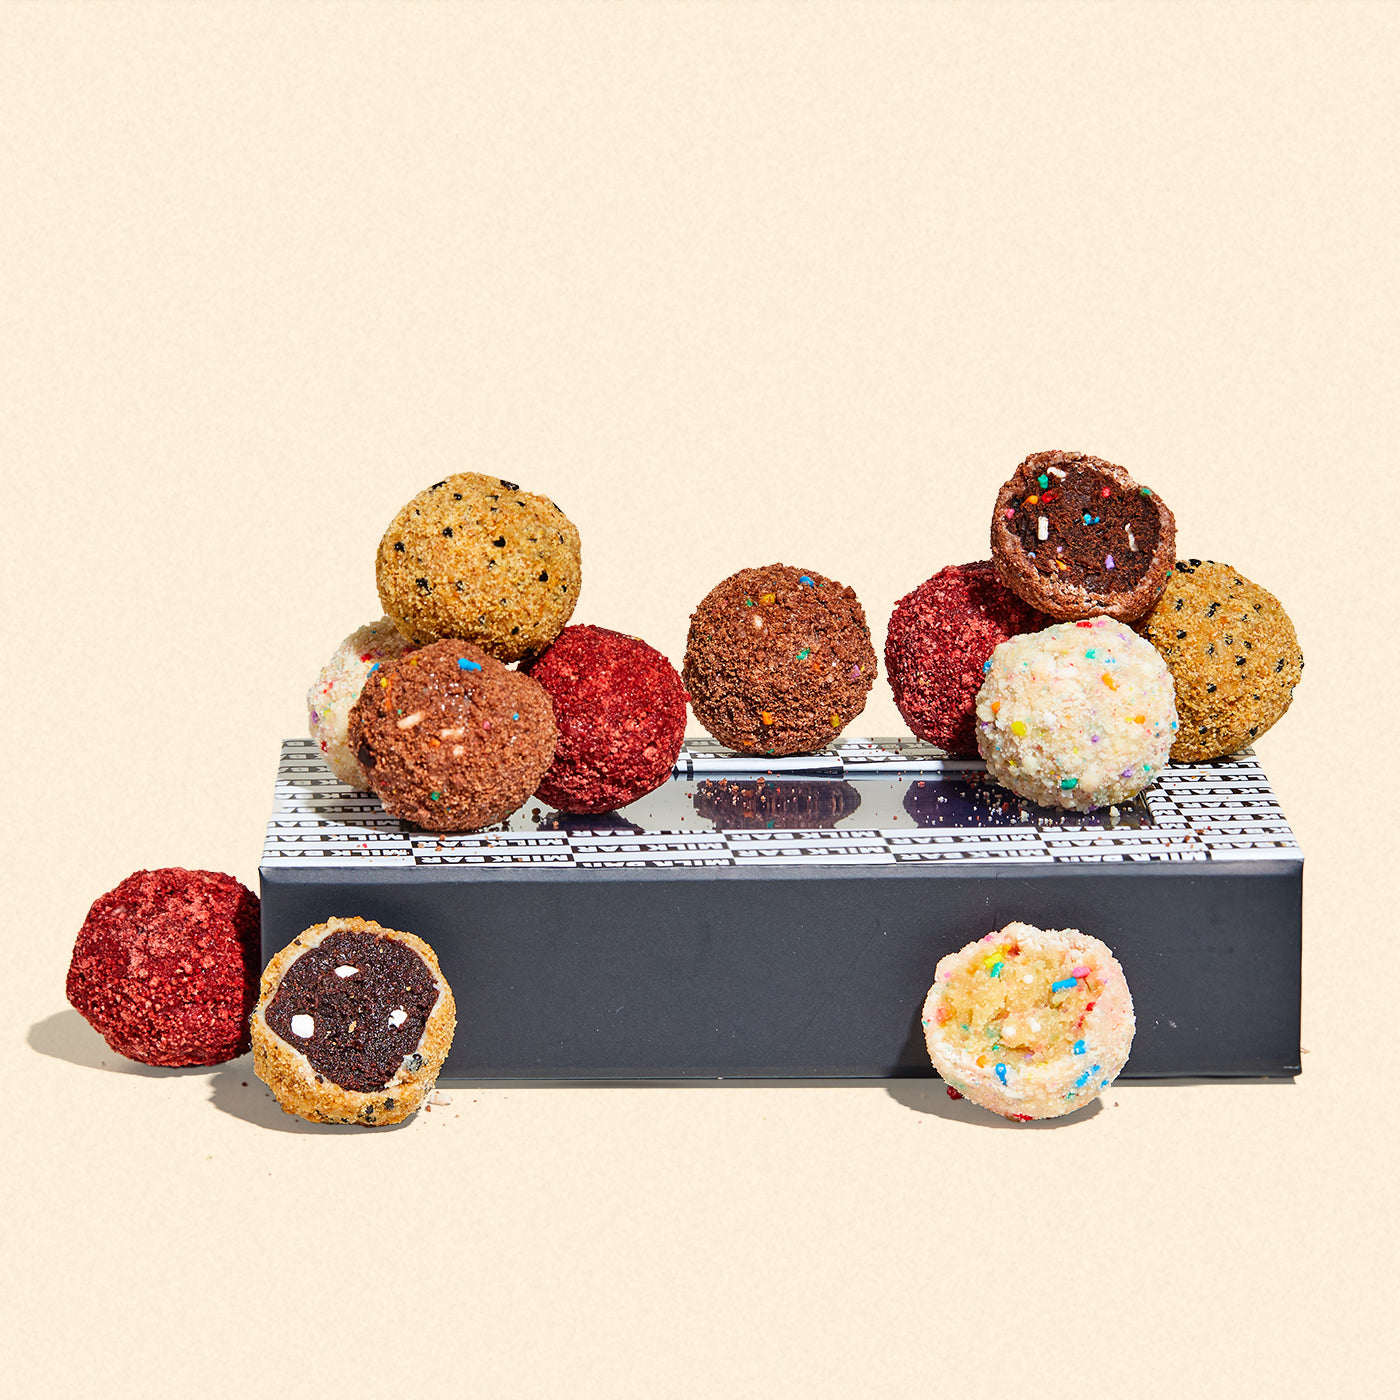 An assortment of unwrapped cake truffles sitting on top of a branded giftable gift box. Flavors include Birthday, Chocolate Birthday, Red Velvet Cheesecake, and S'mores.